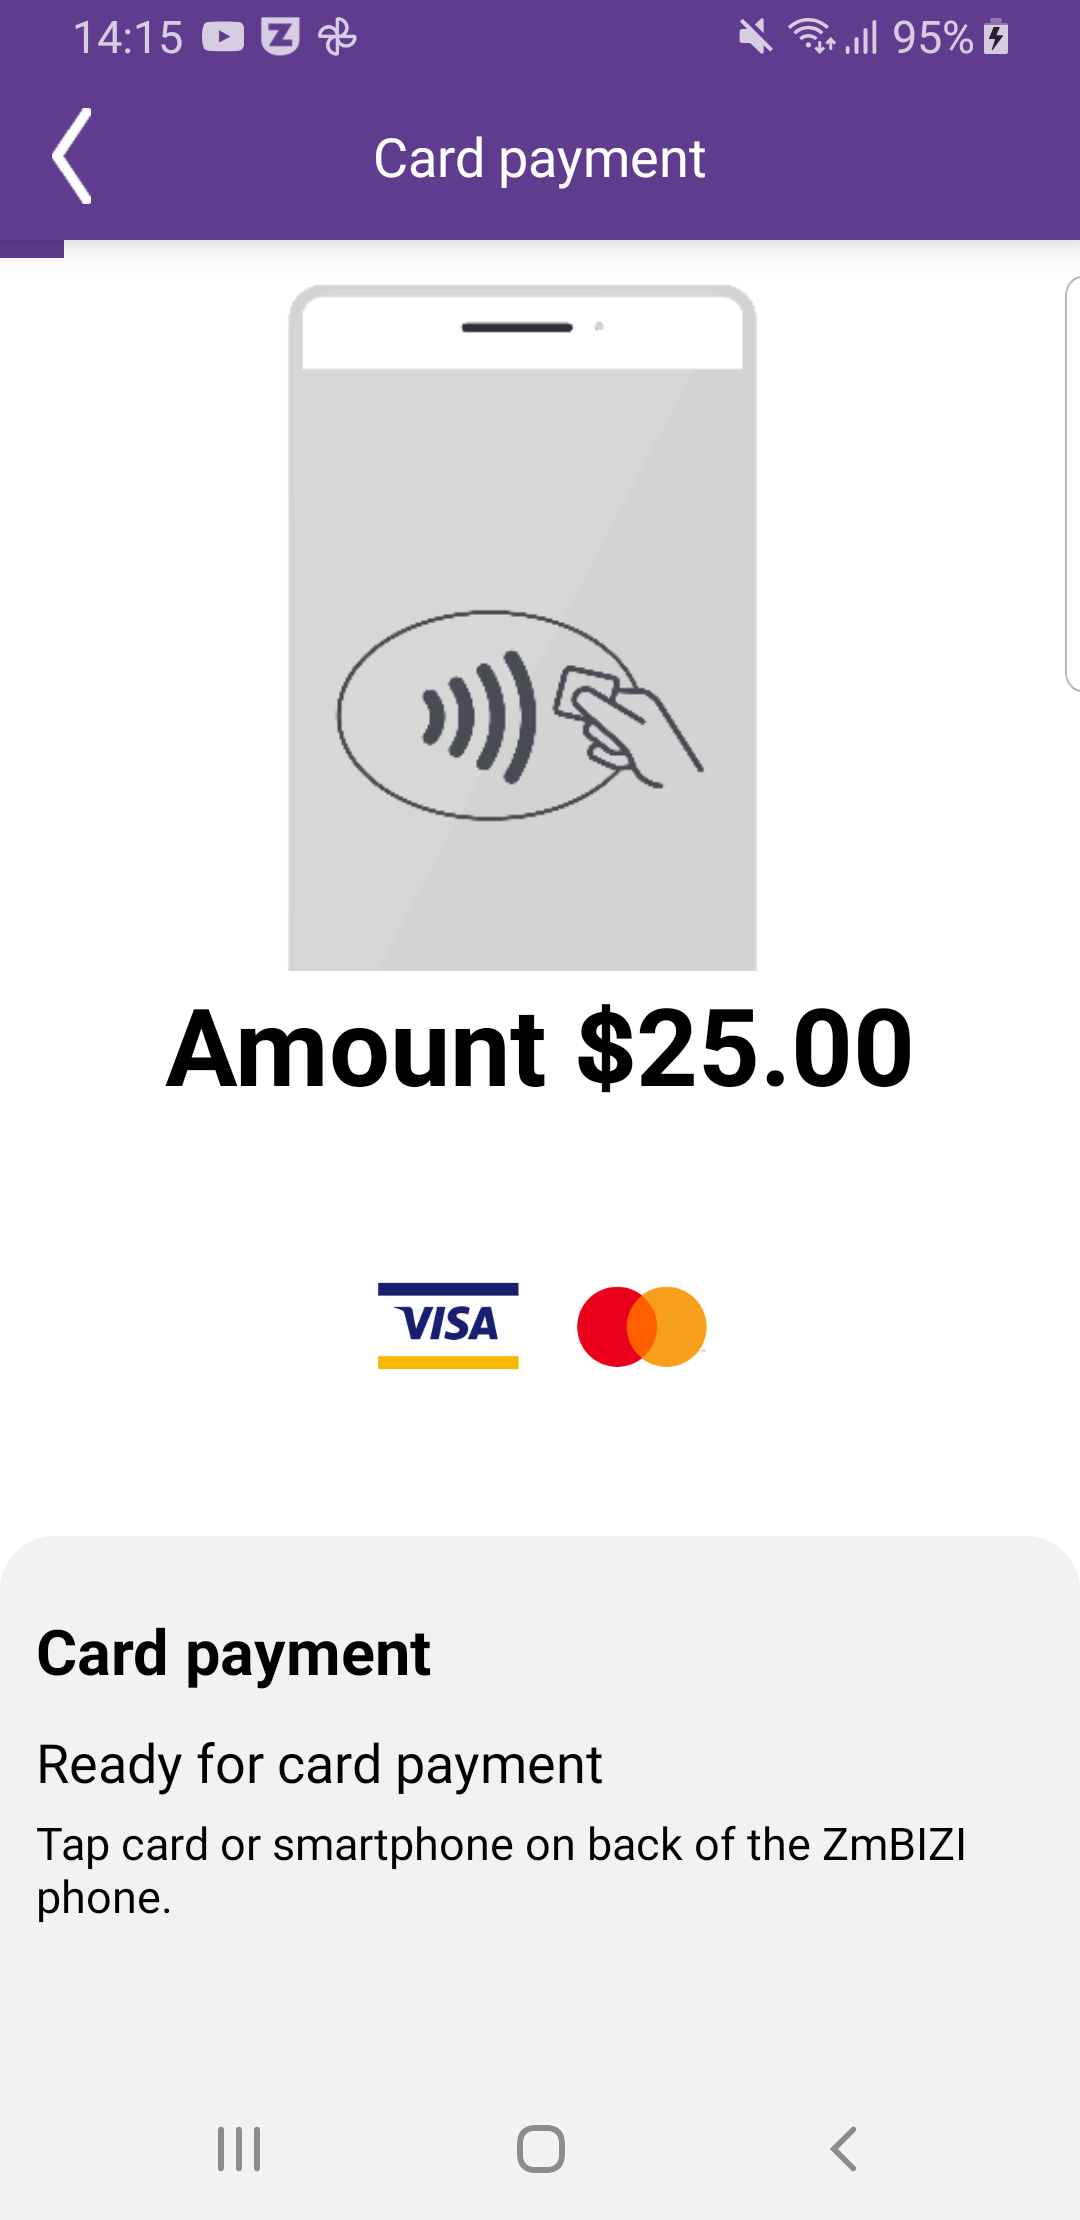 Phone screen image showing payment acceptance via NFC tap